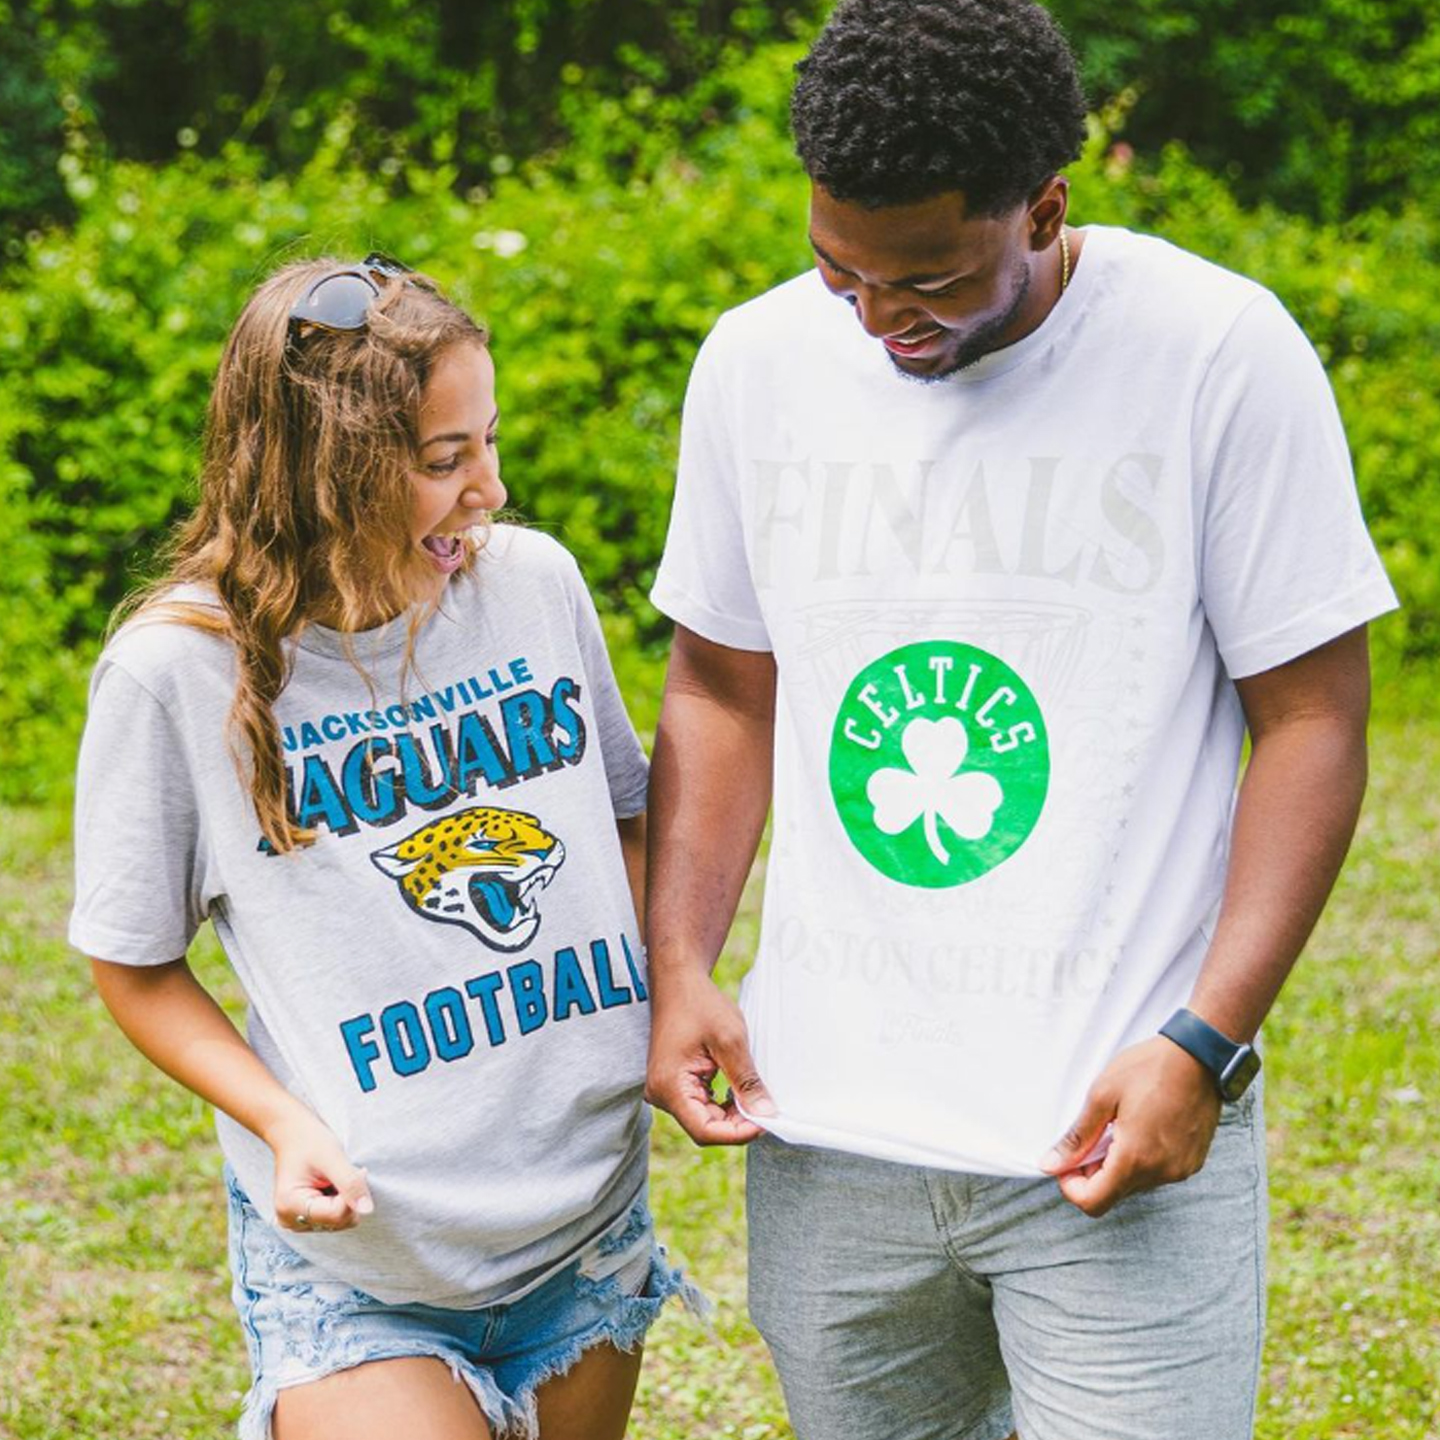 celia and jeremiah with their jags and celtics shirts on